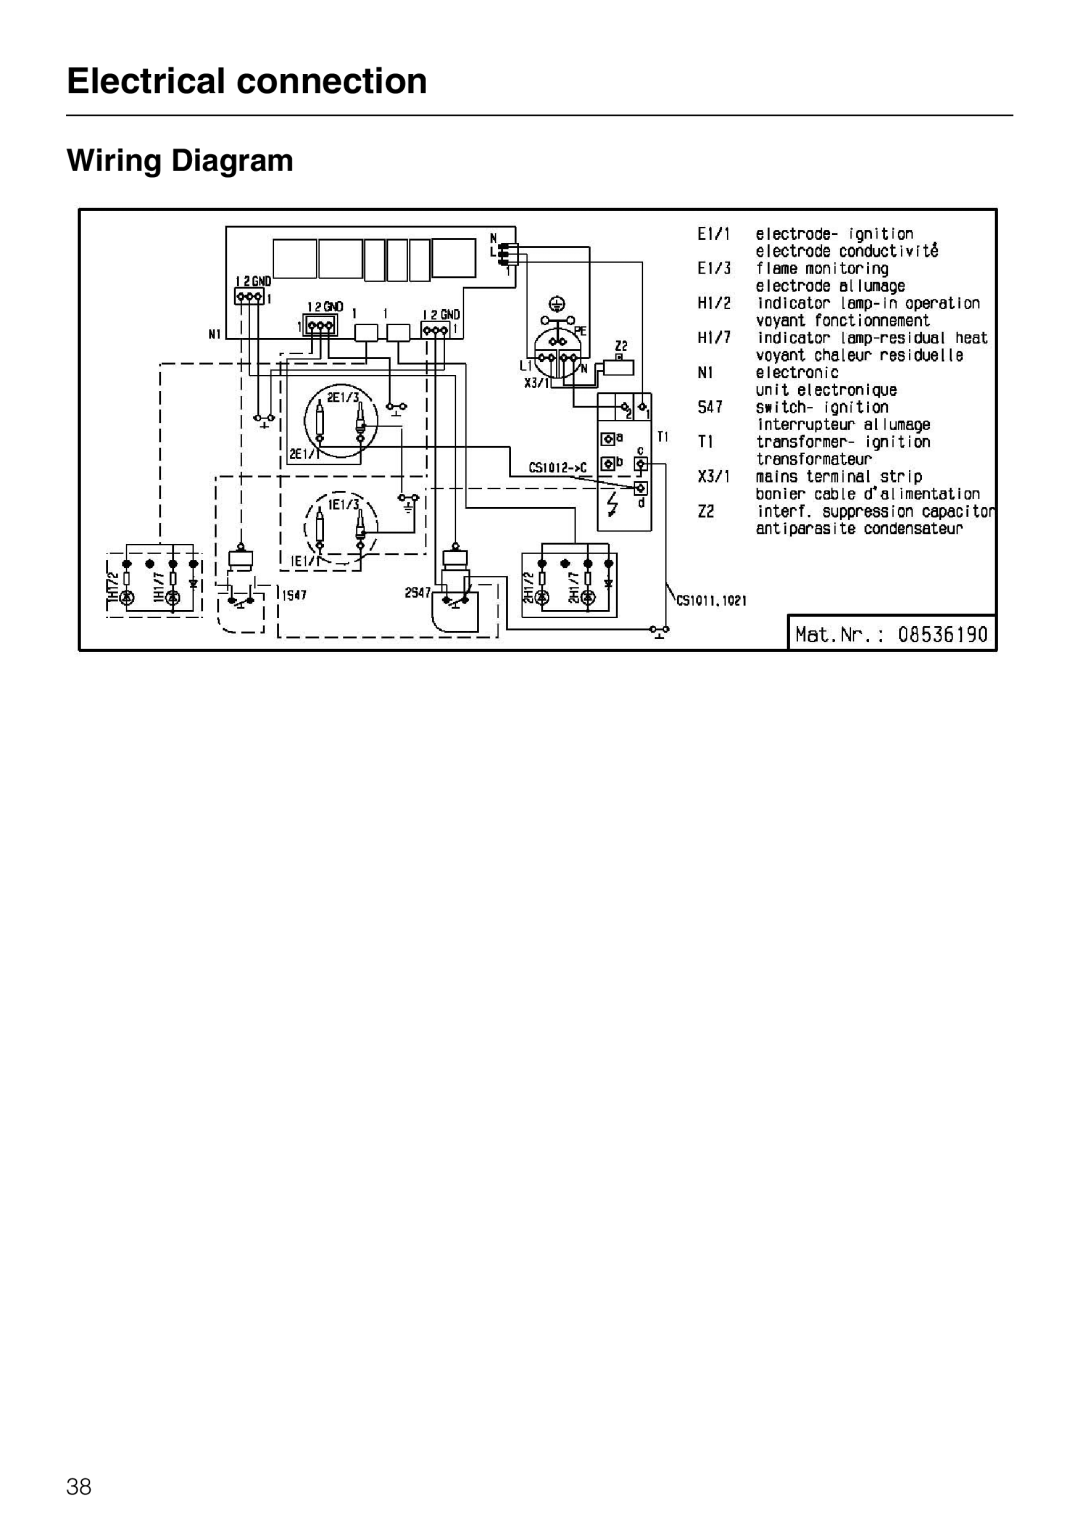 Miele CS1012 installation instructions Wiring Diagram, Electrical connection 